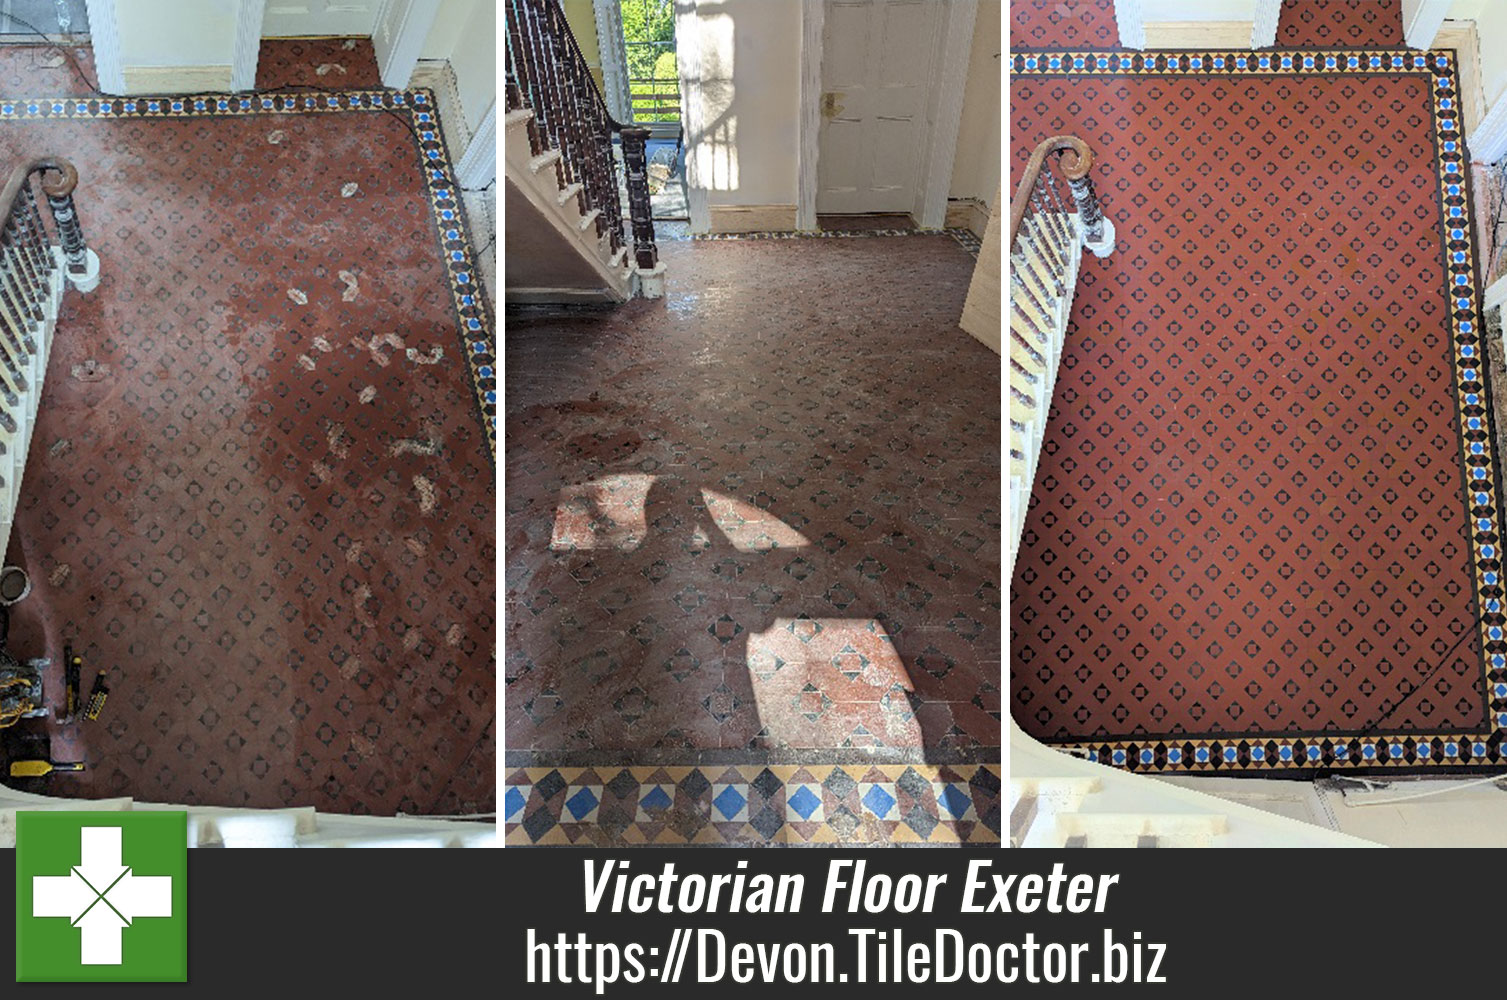 Using Tile Doctor Grout Clean-Up to Acid Wash an Old Victorian Tiled Hallway Floor in Exeter